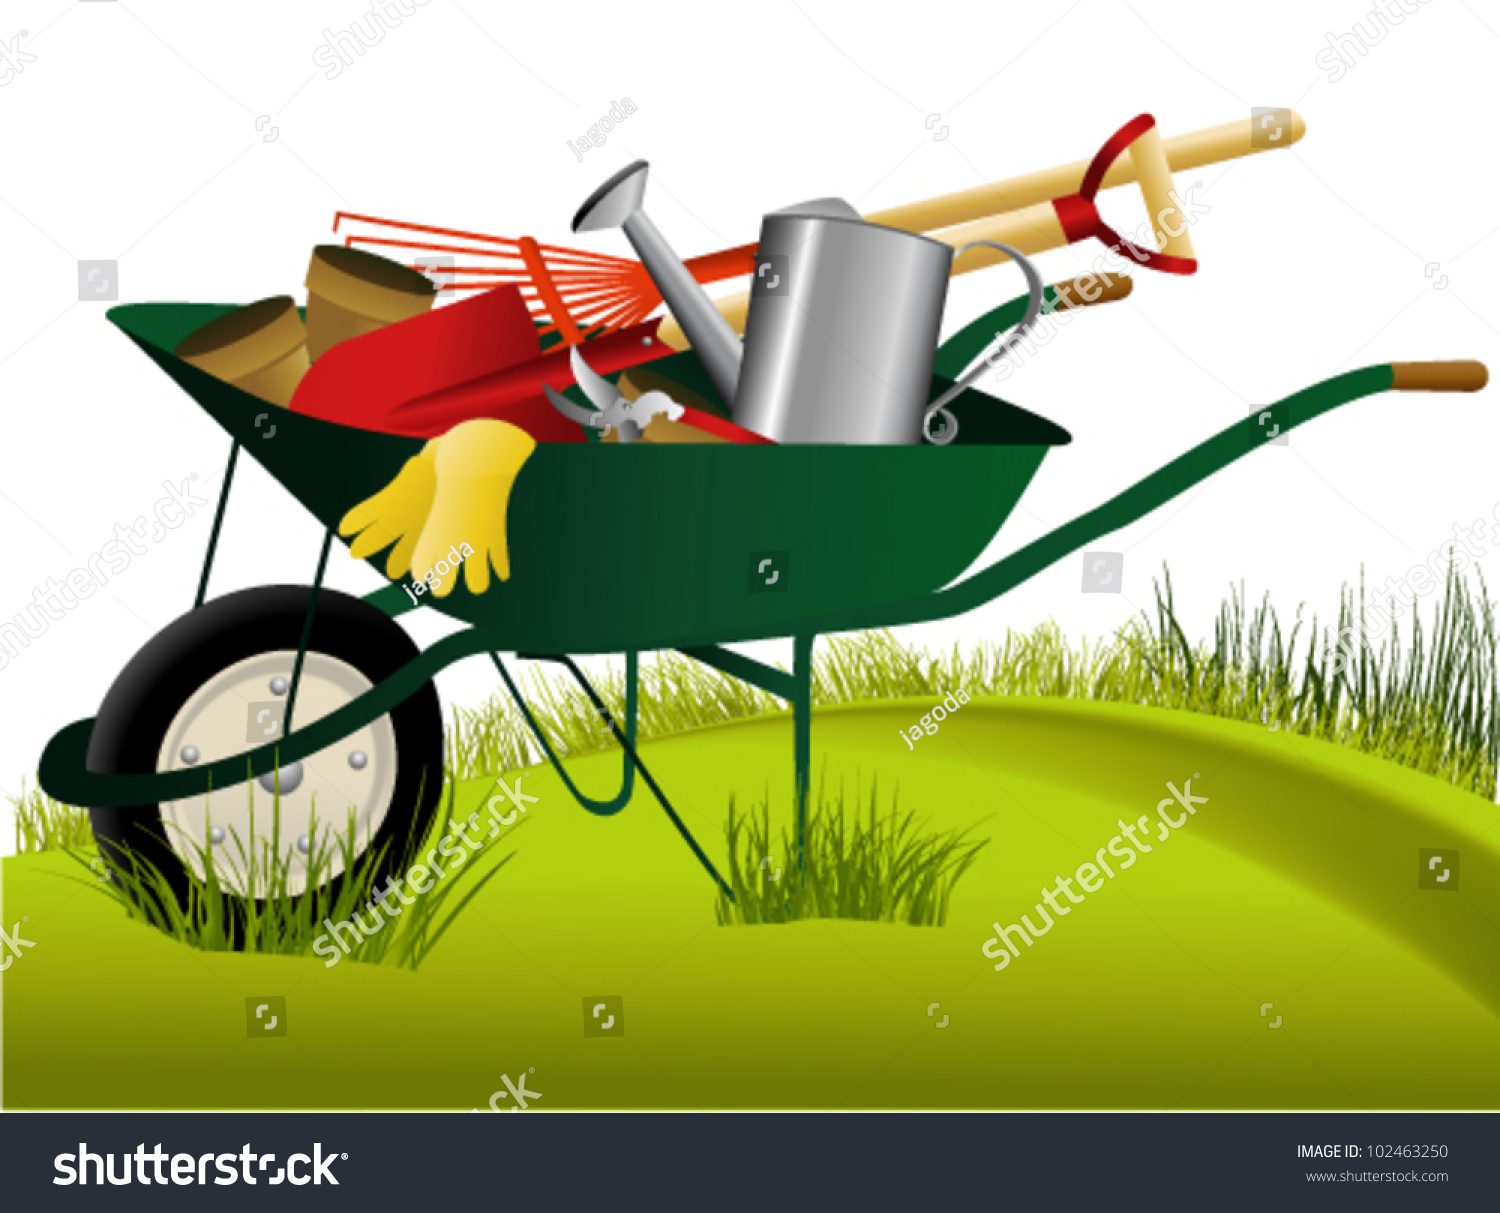 clipart pictures of gardening tools - photo #42